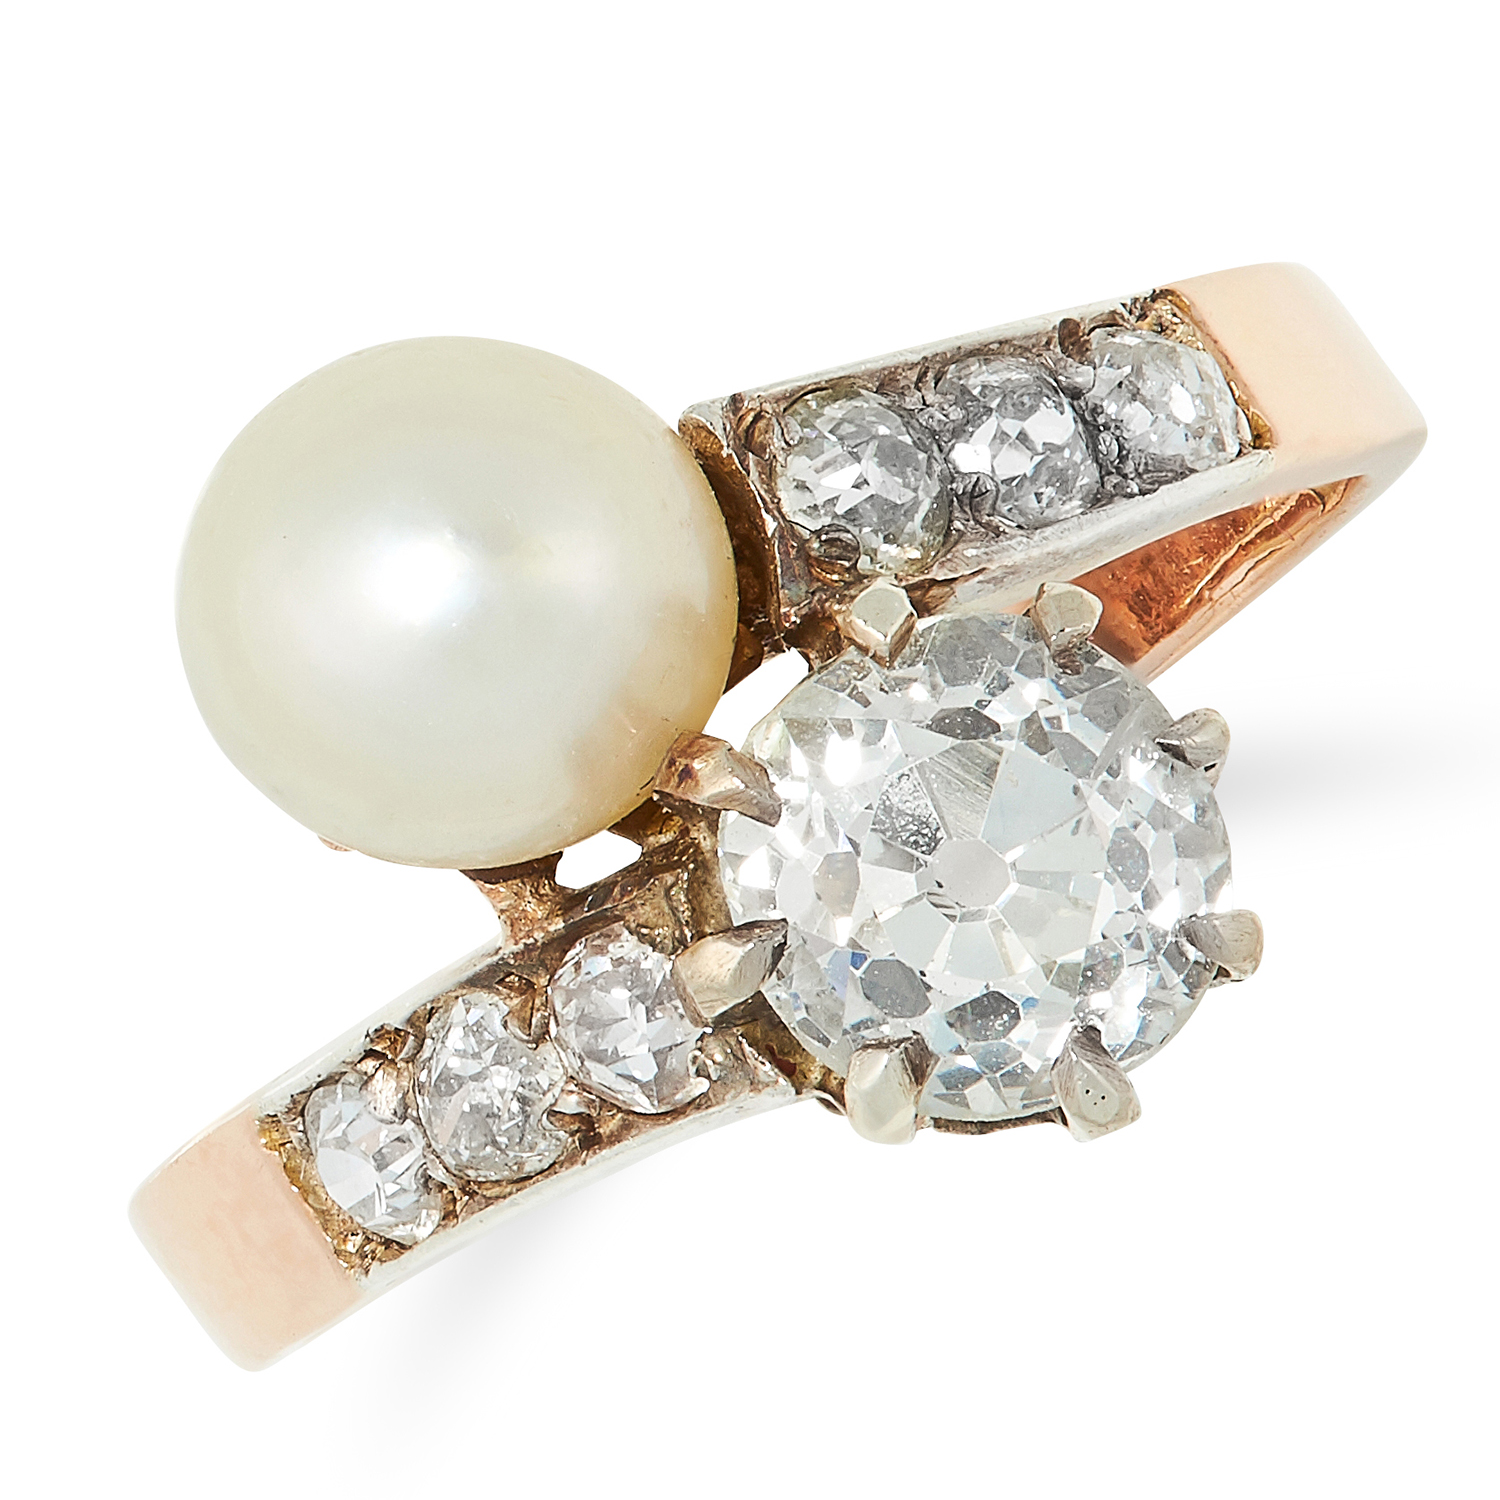 ANTIQUE PEARL AND DIAMOND TOI ET MOI RING set with an old cut diamond of 1.12 carats and a pearl